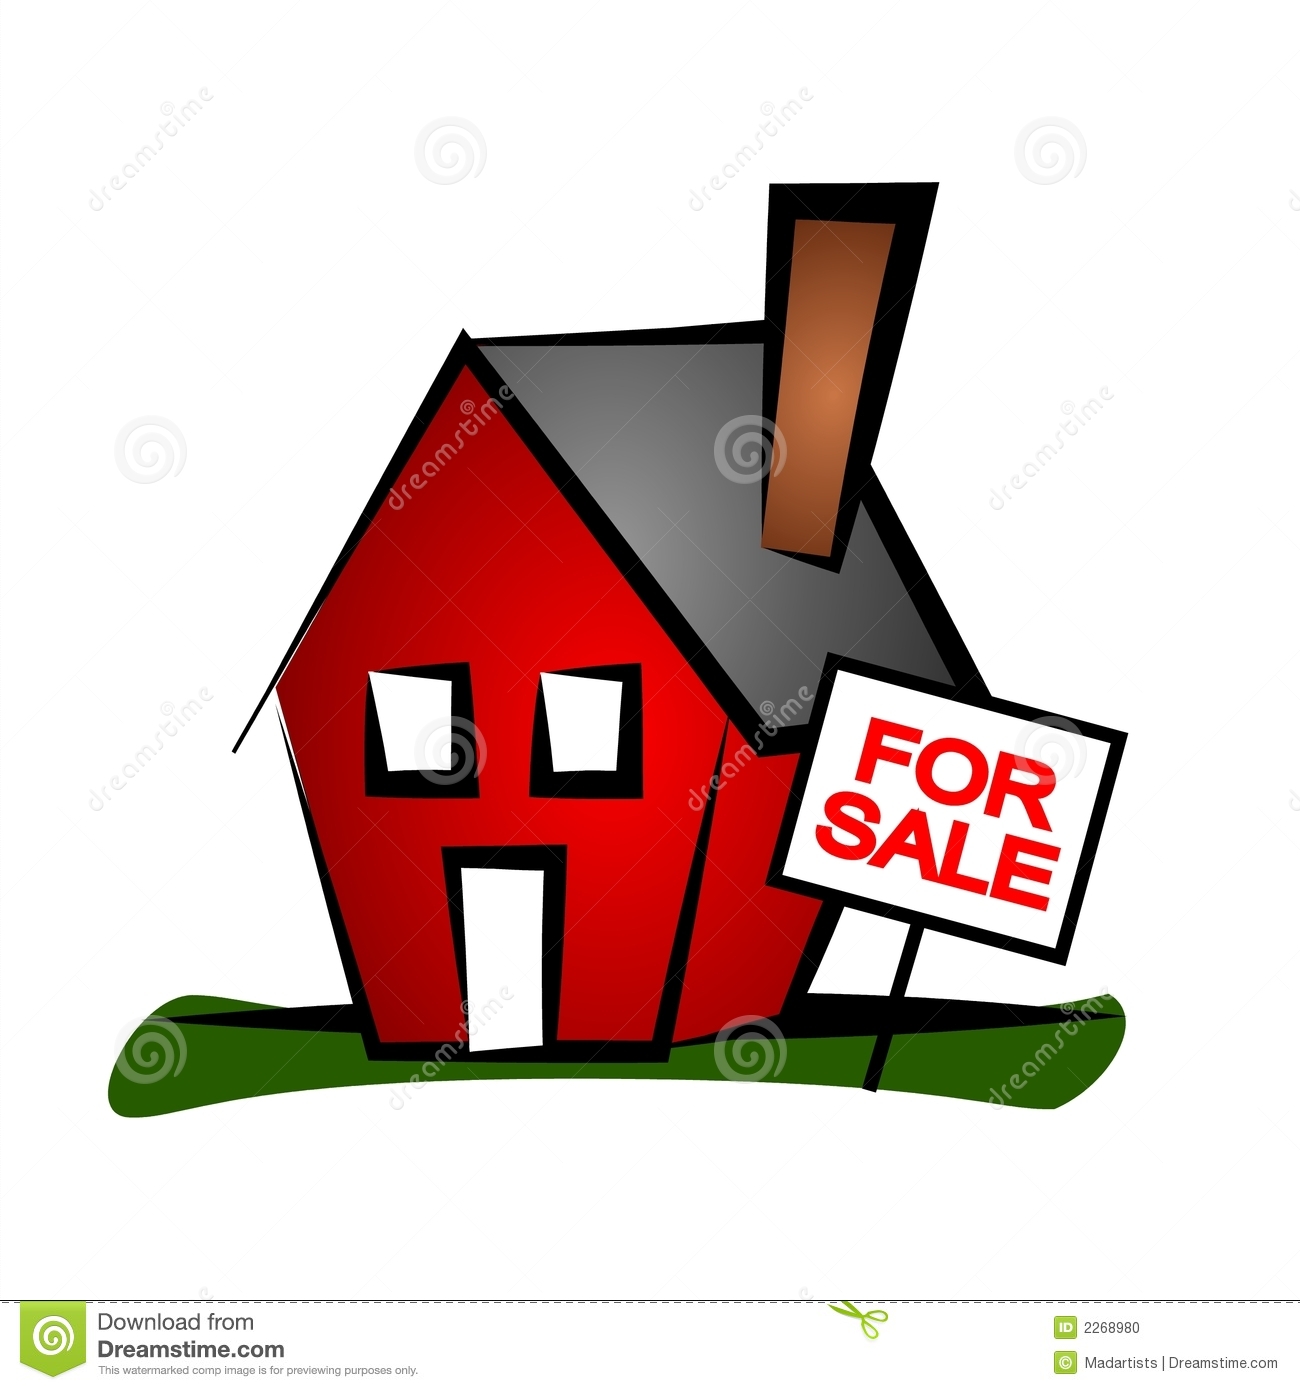 Clip Art Real Estate Illustration Of A Little Red House With A For